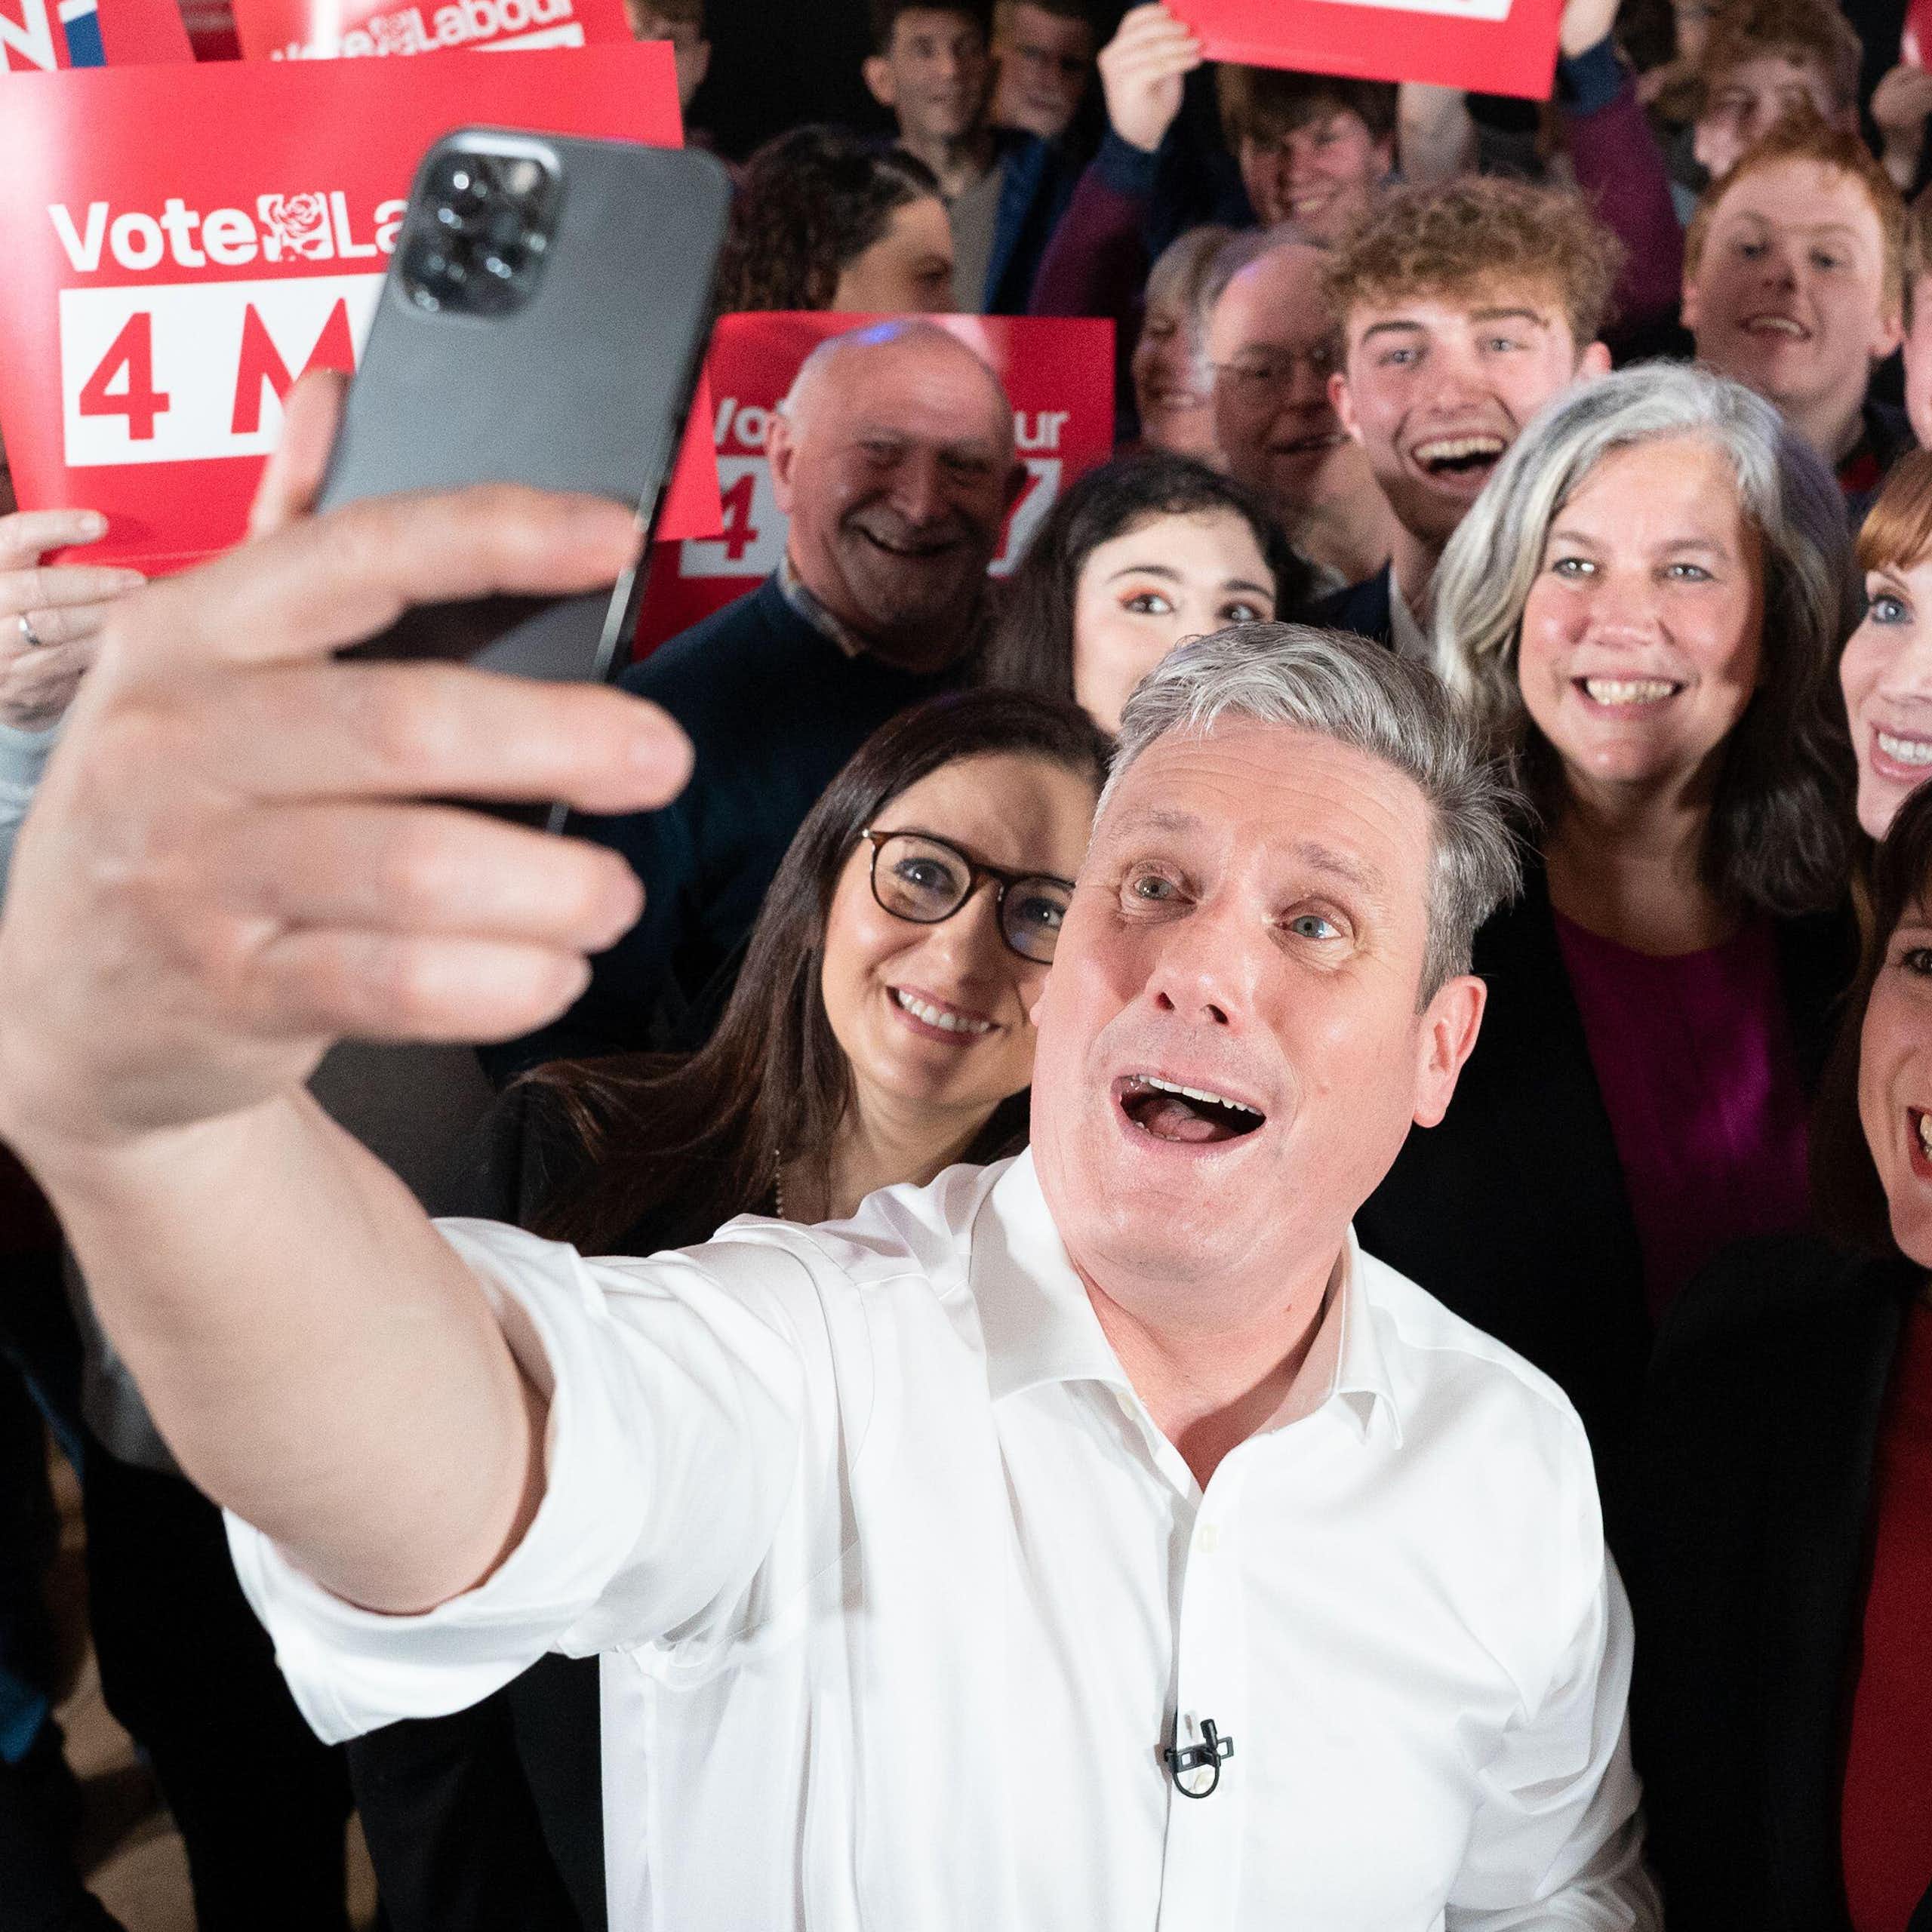 Keir Starmer taking a selfie with members of his cabinet and Labour party activists holding up red 'vote labour' signs